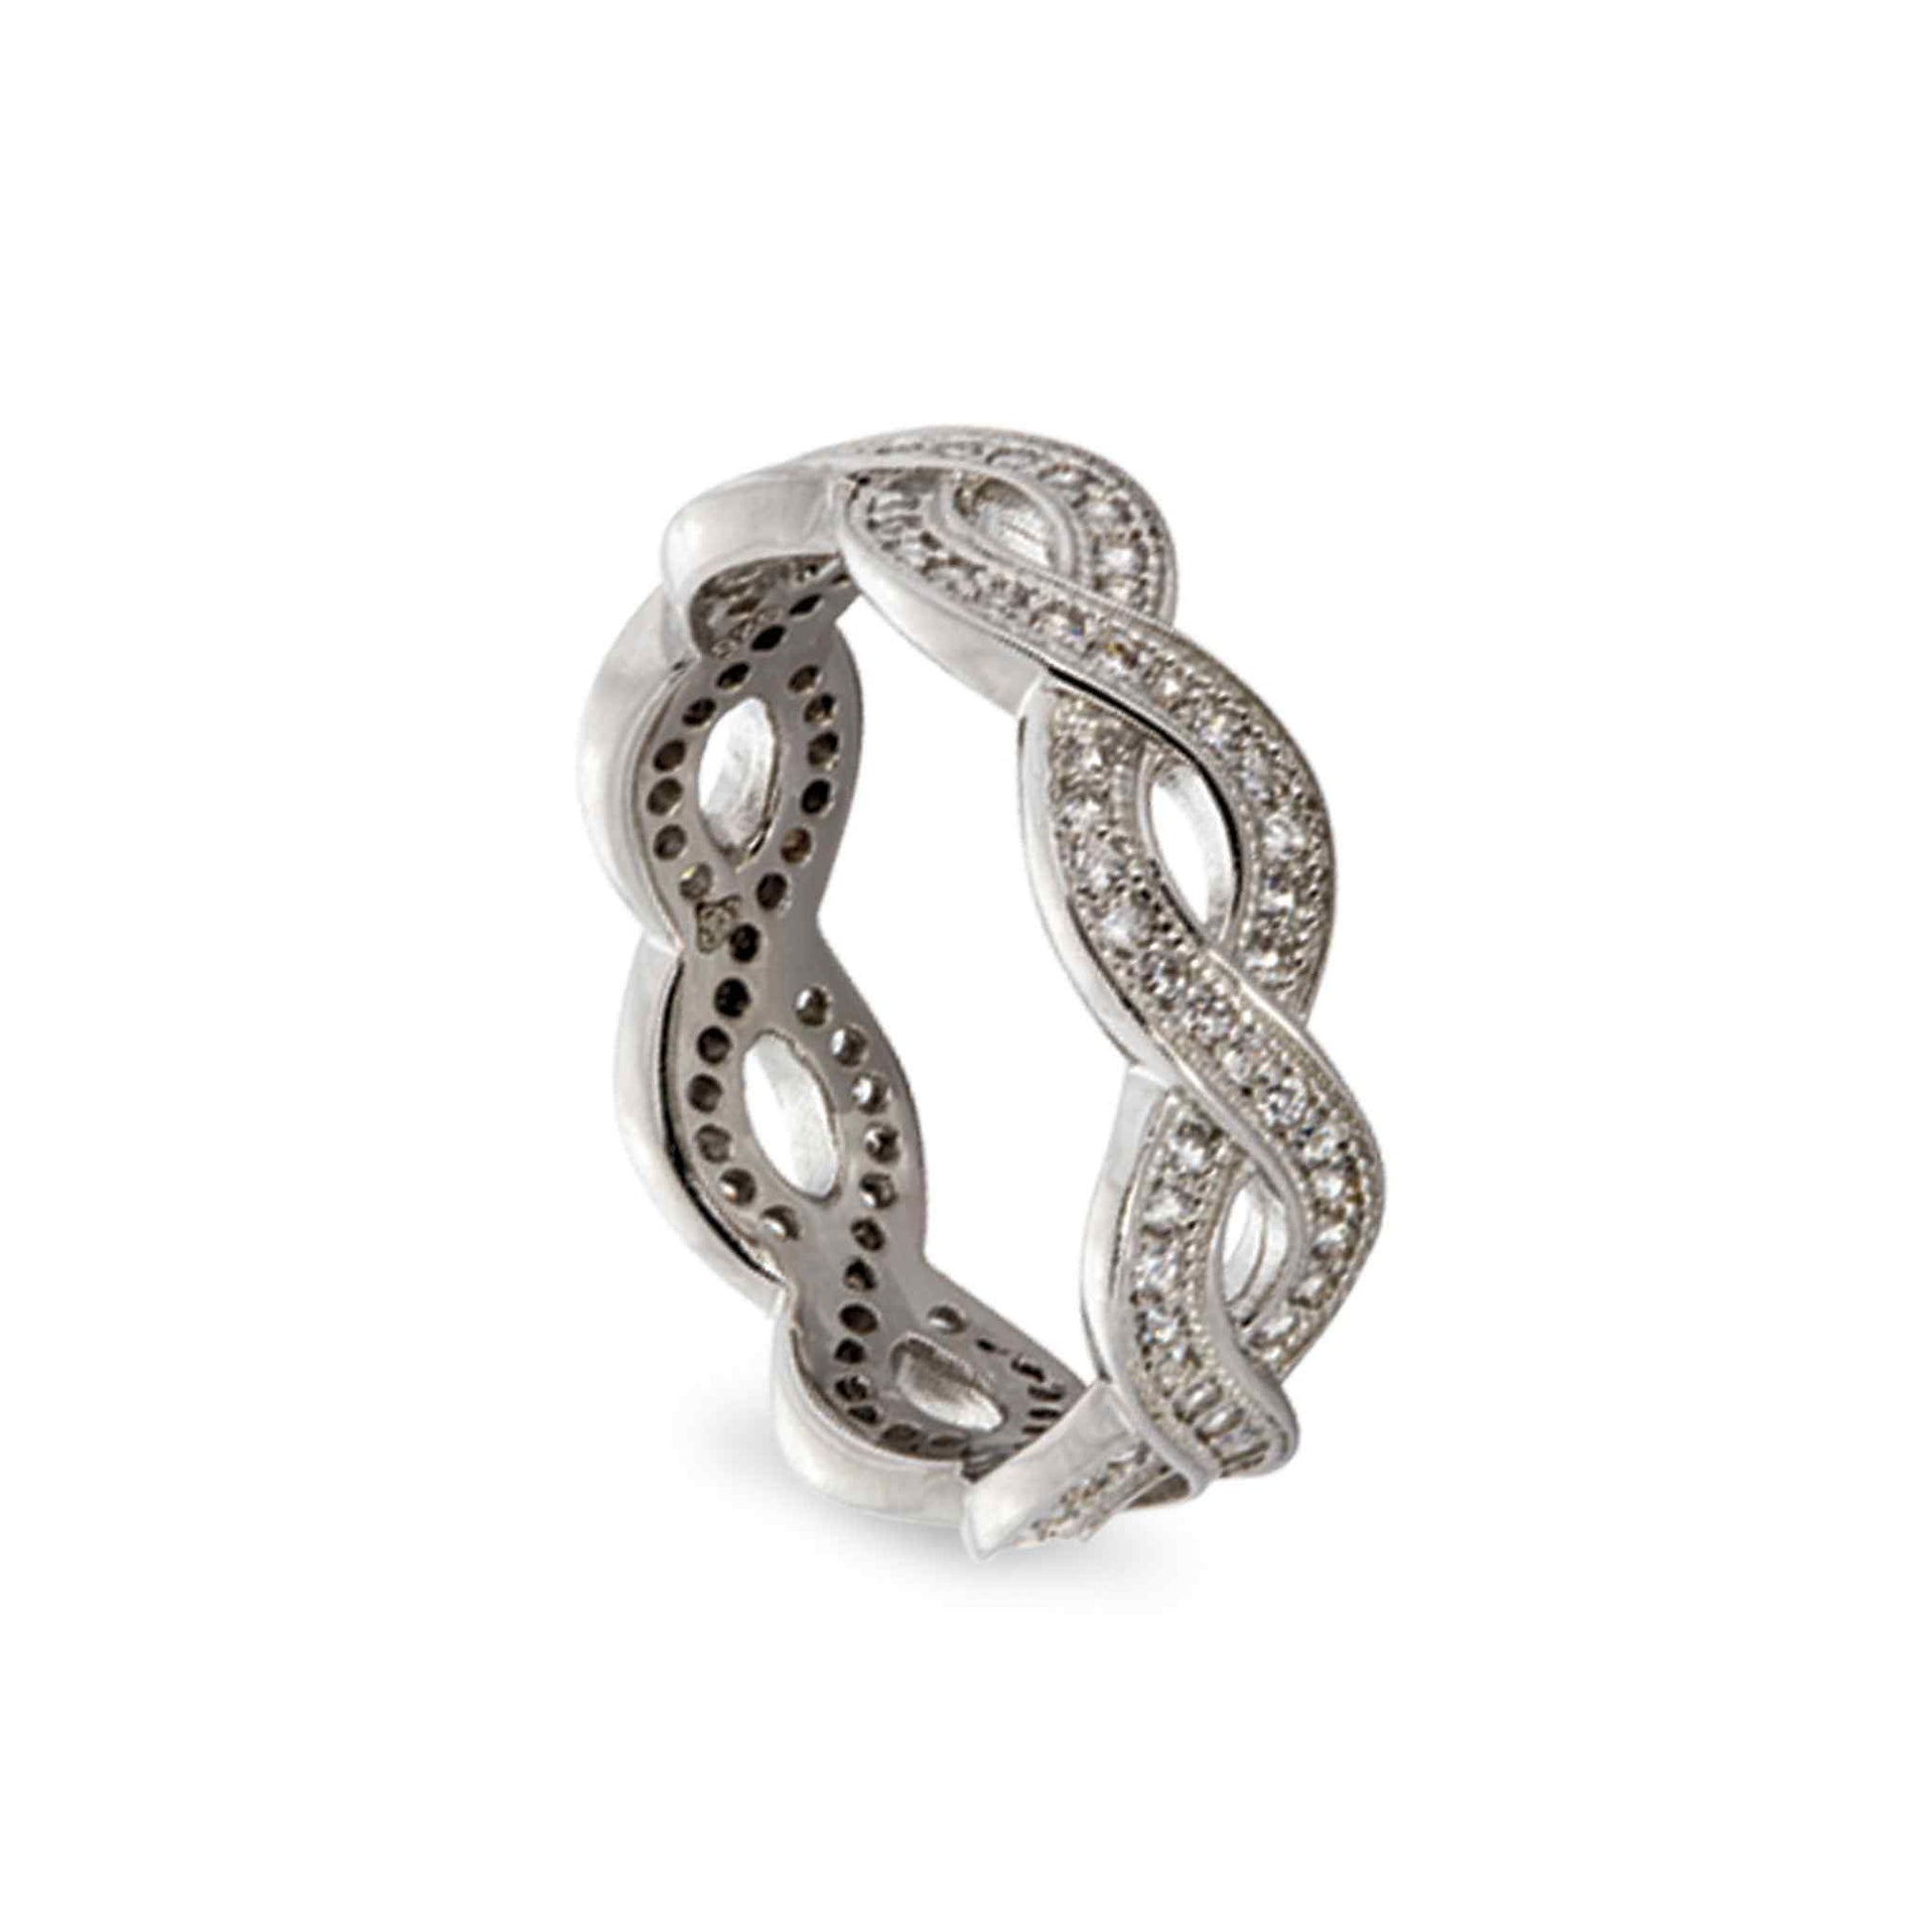 A twisted infinity sign women's ring with simulated diamonds displayed on a neutral white background.